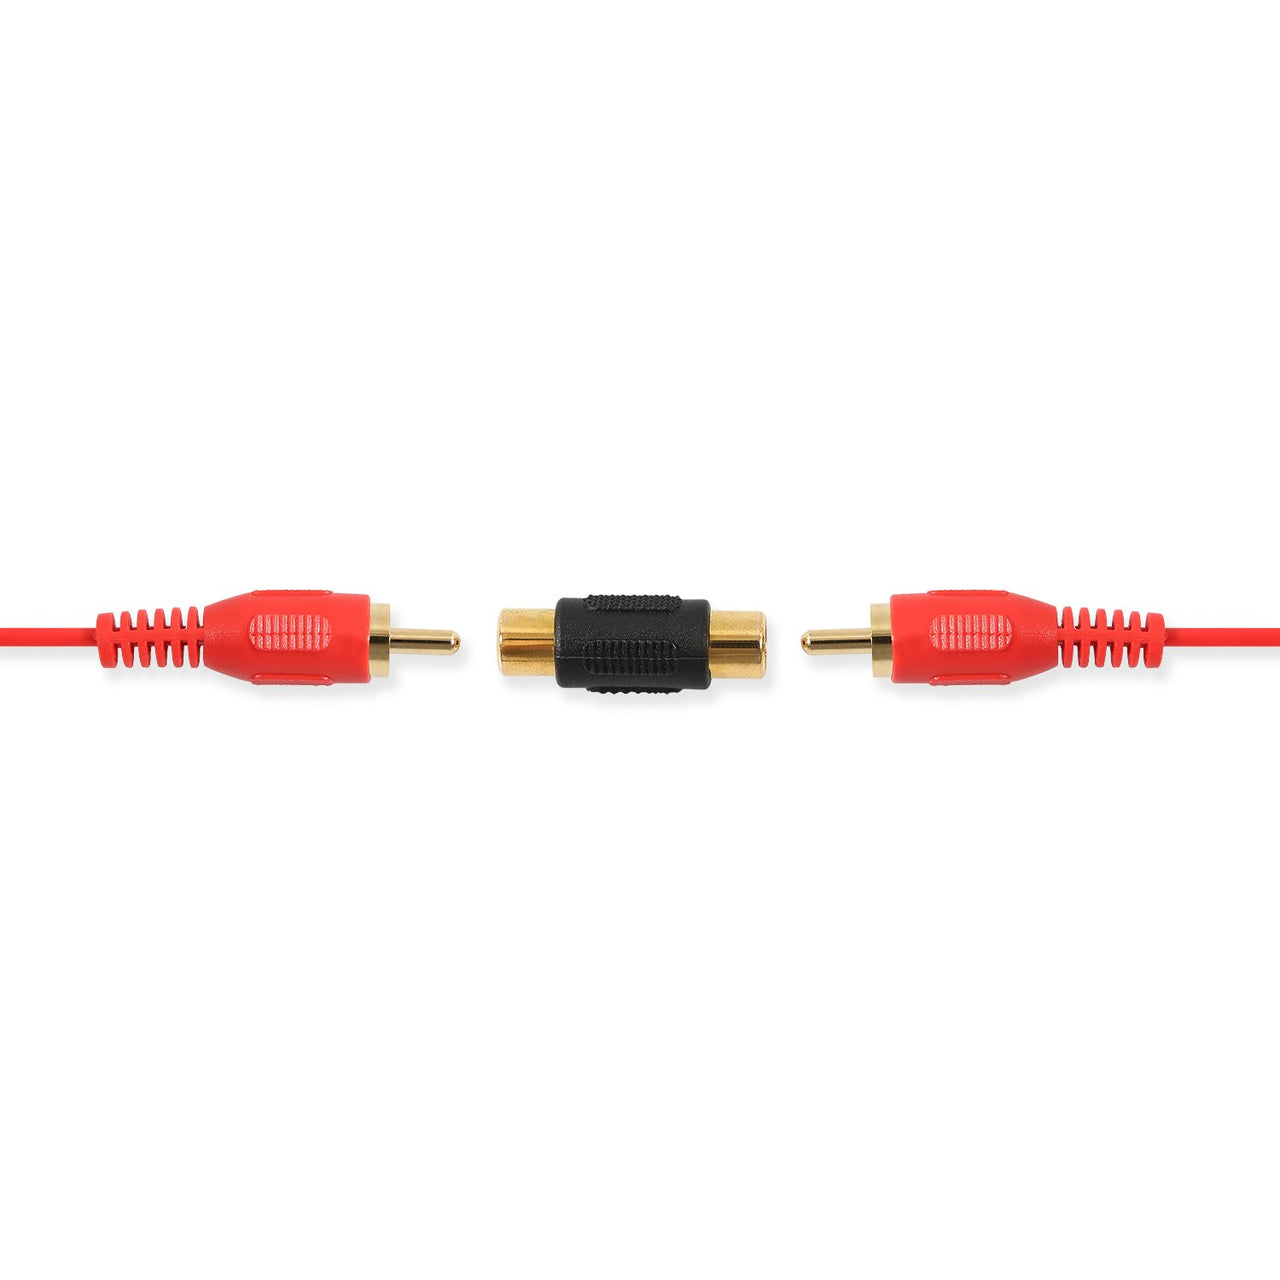 Absolute FF100-20 20 Pack Audio Video Gold RCA Female to Female Coupler Adapter